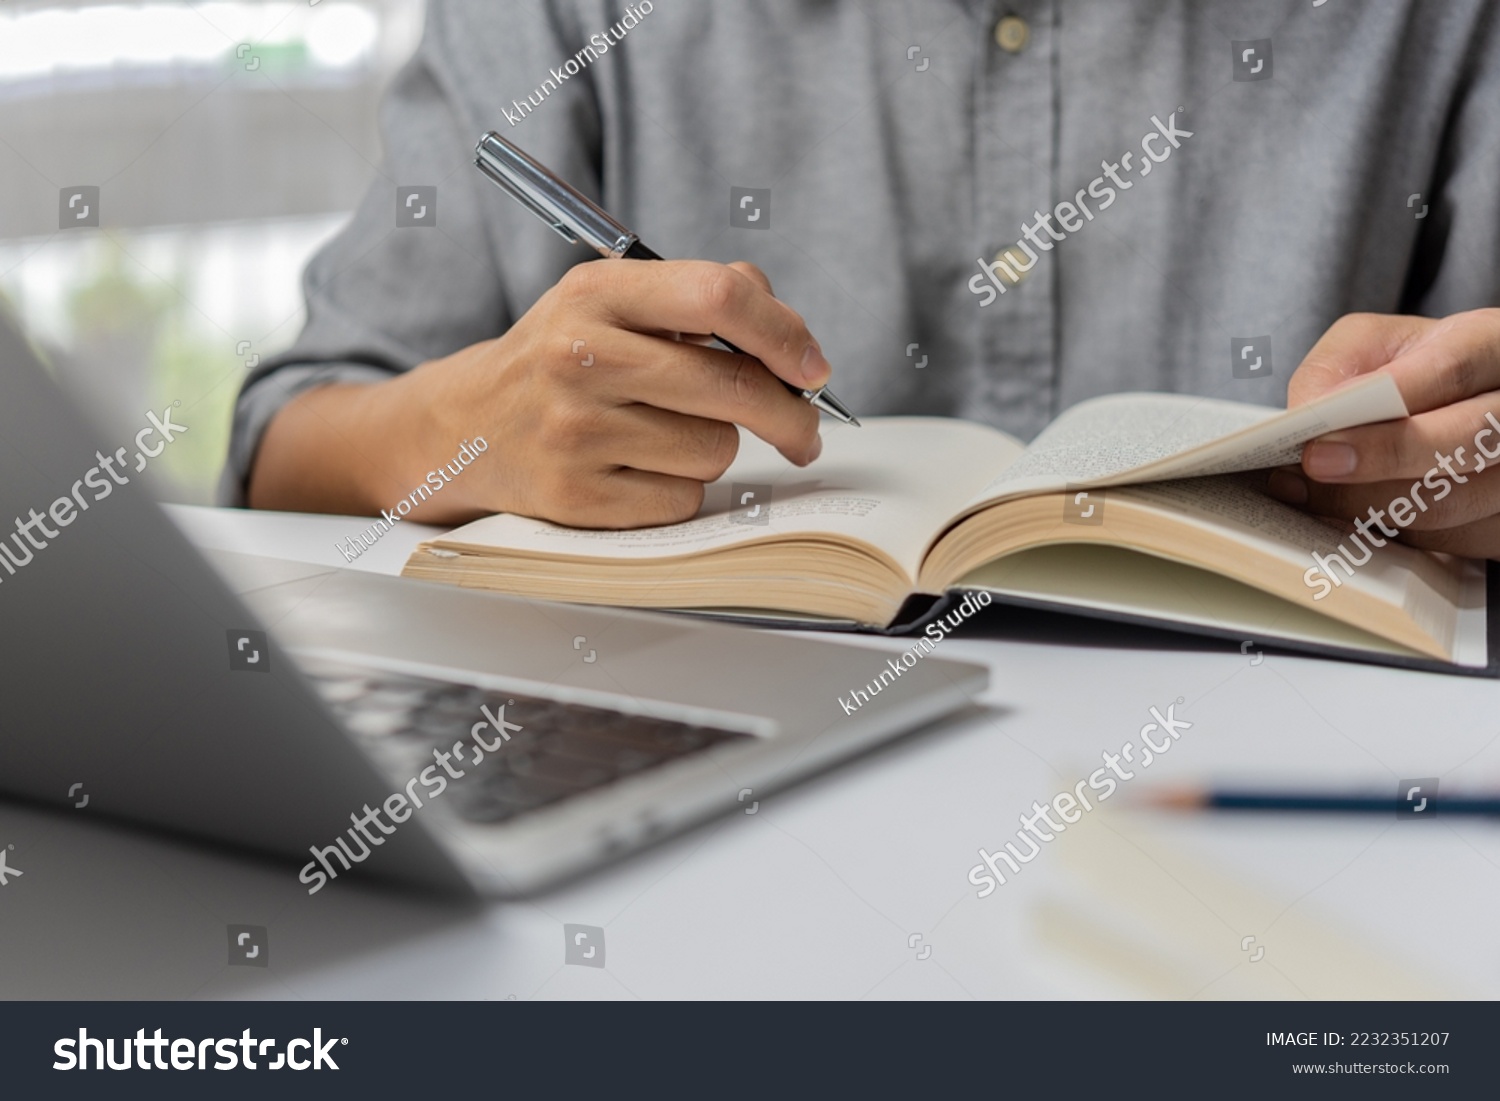 learning online class by using laptop computer and writing notebook at workplace, Education development or knowledge improvement concept. #2232351207